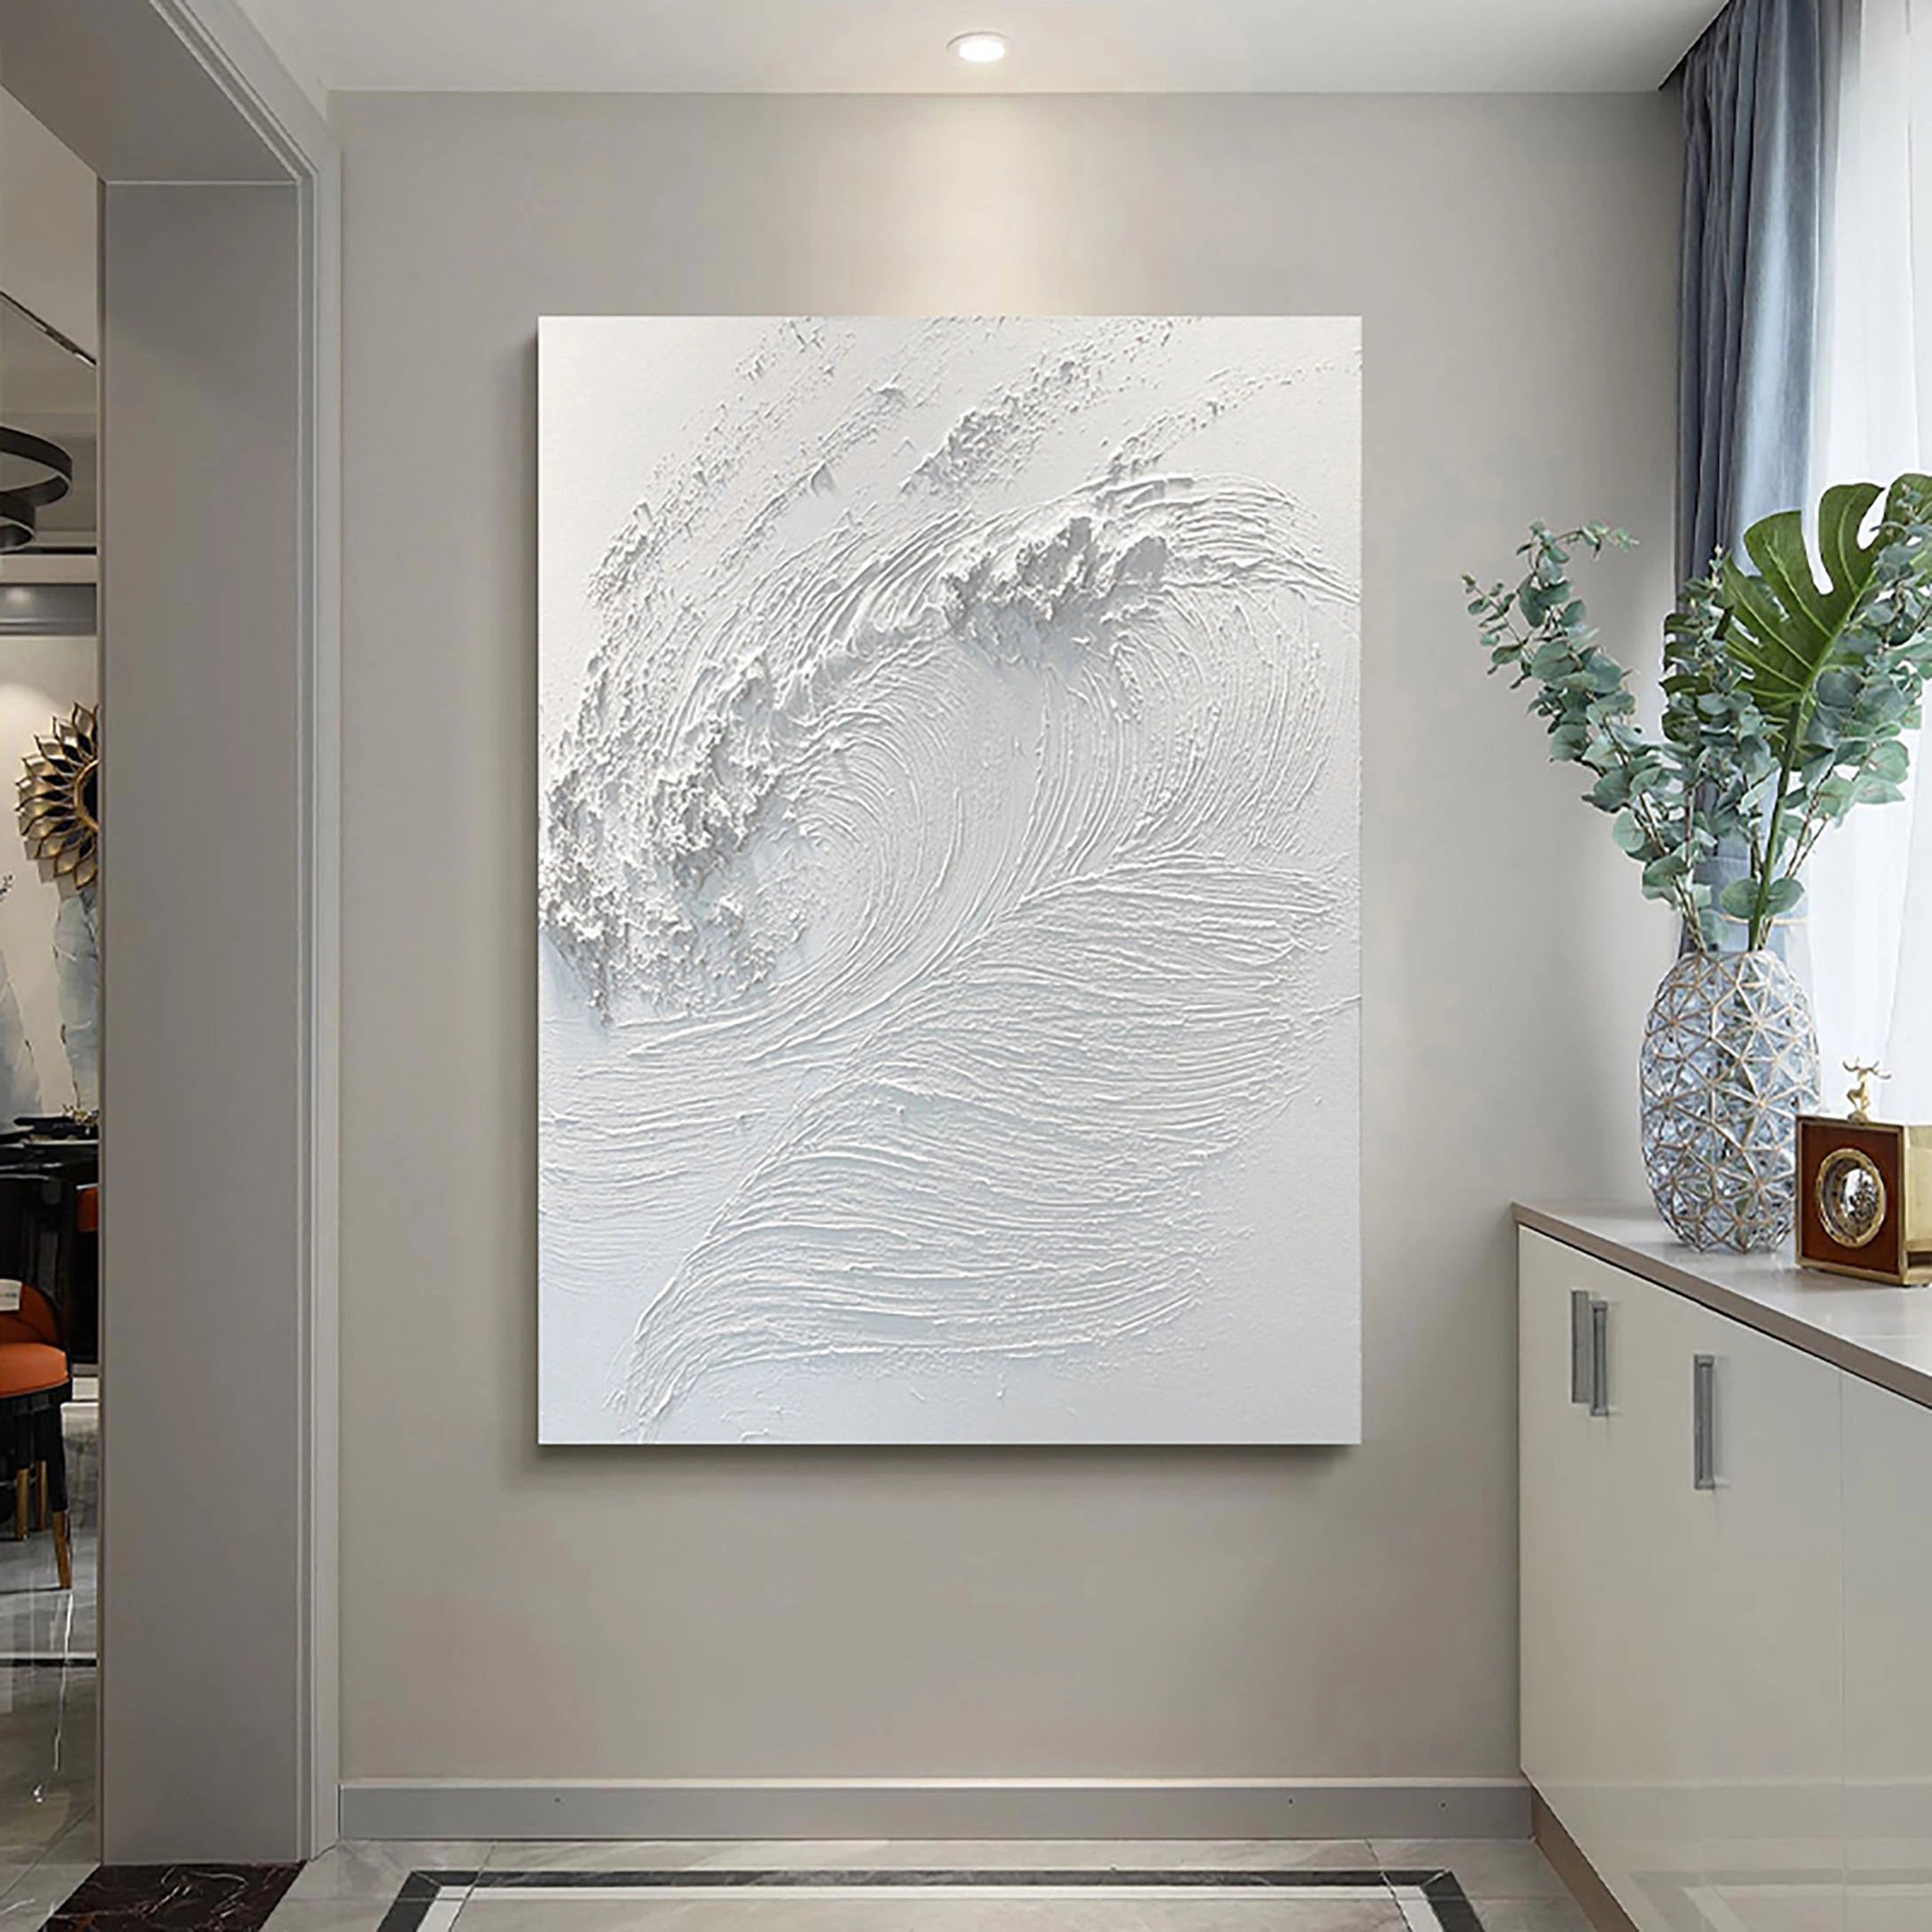 White 3D Textured Plaster Wall Art Surf Art Abstract Handcrafted Painting Minimalist Home Decor